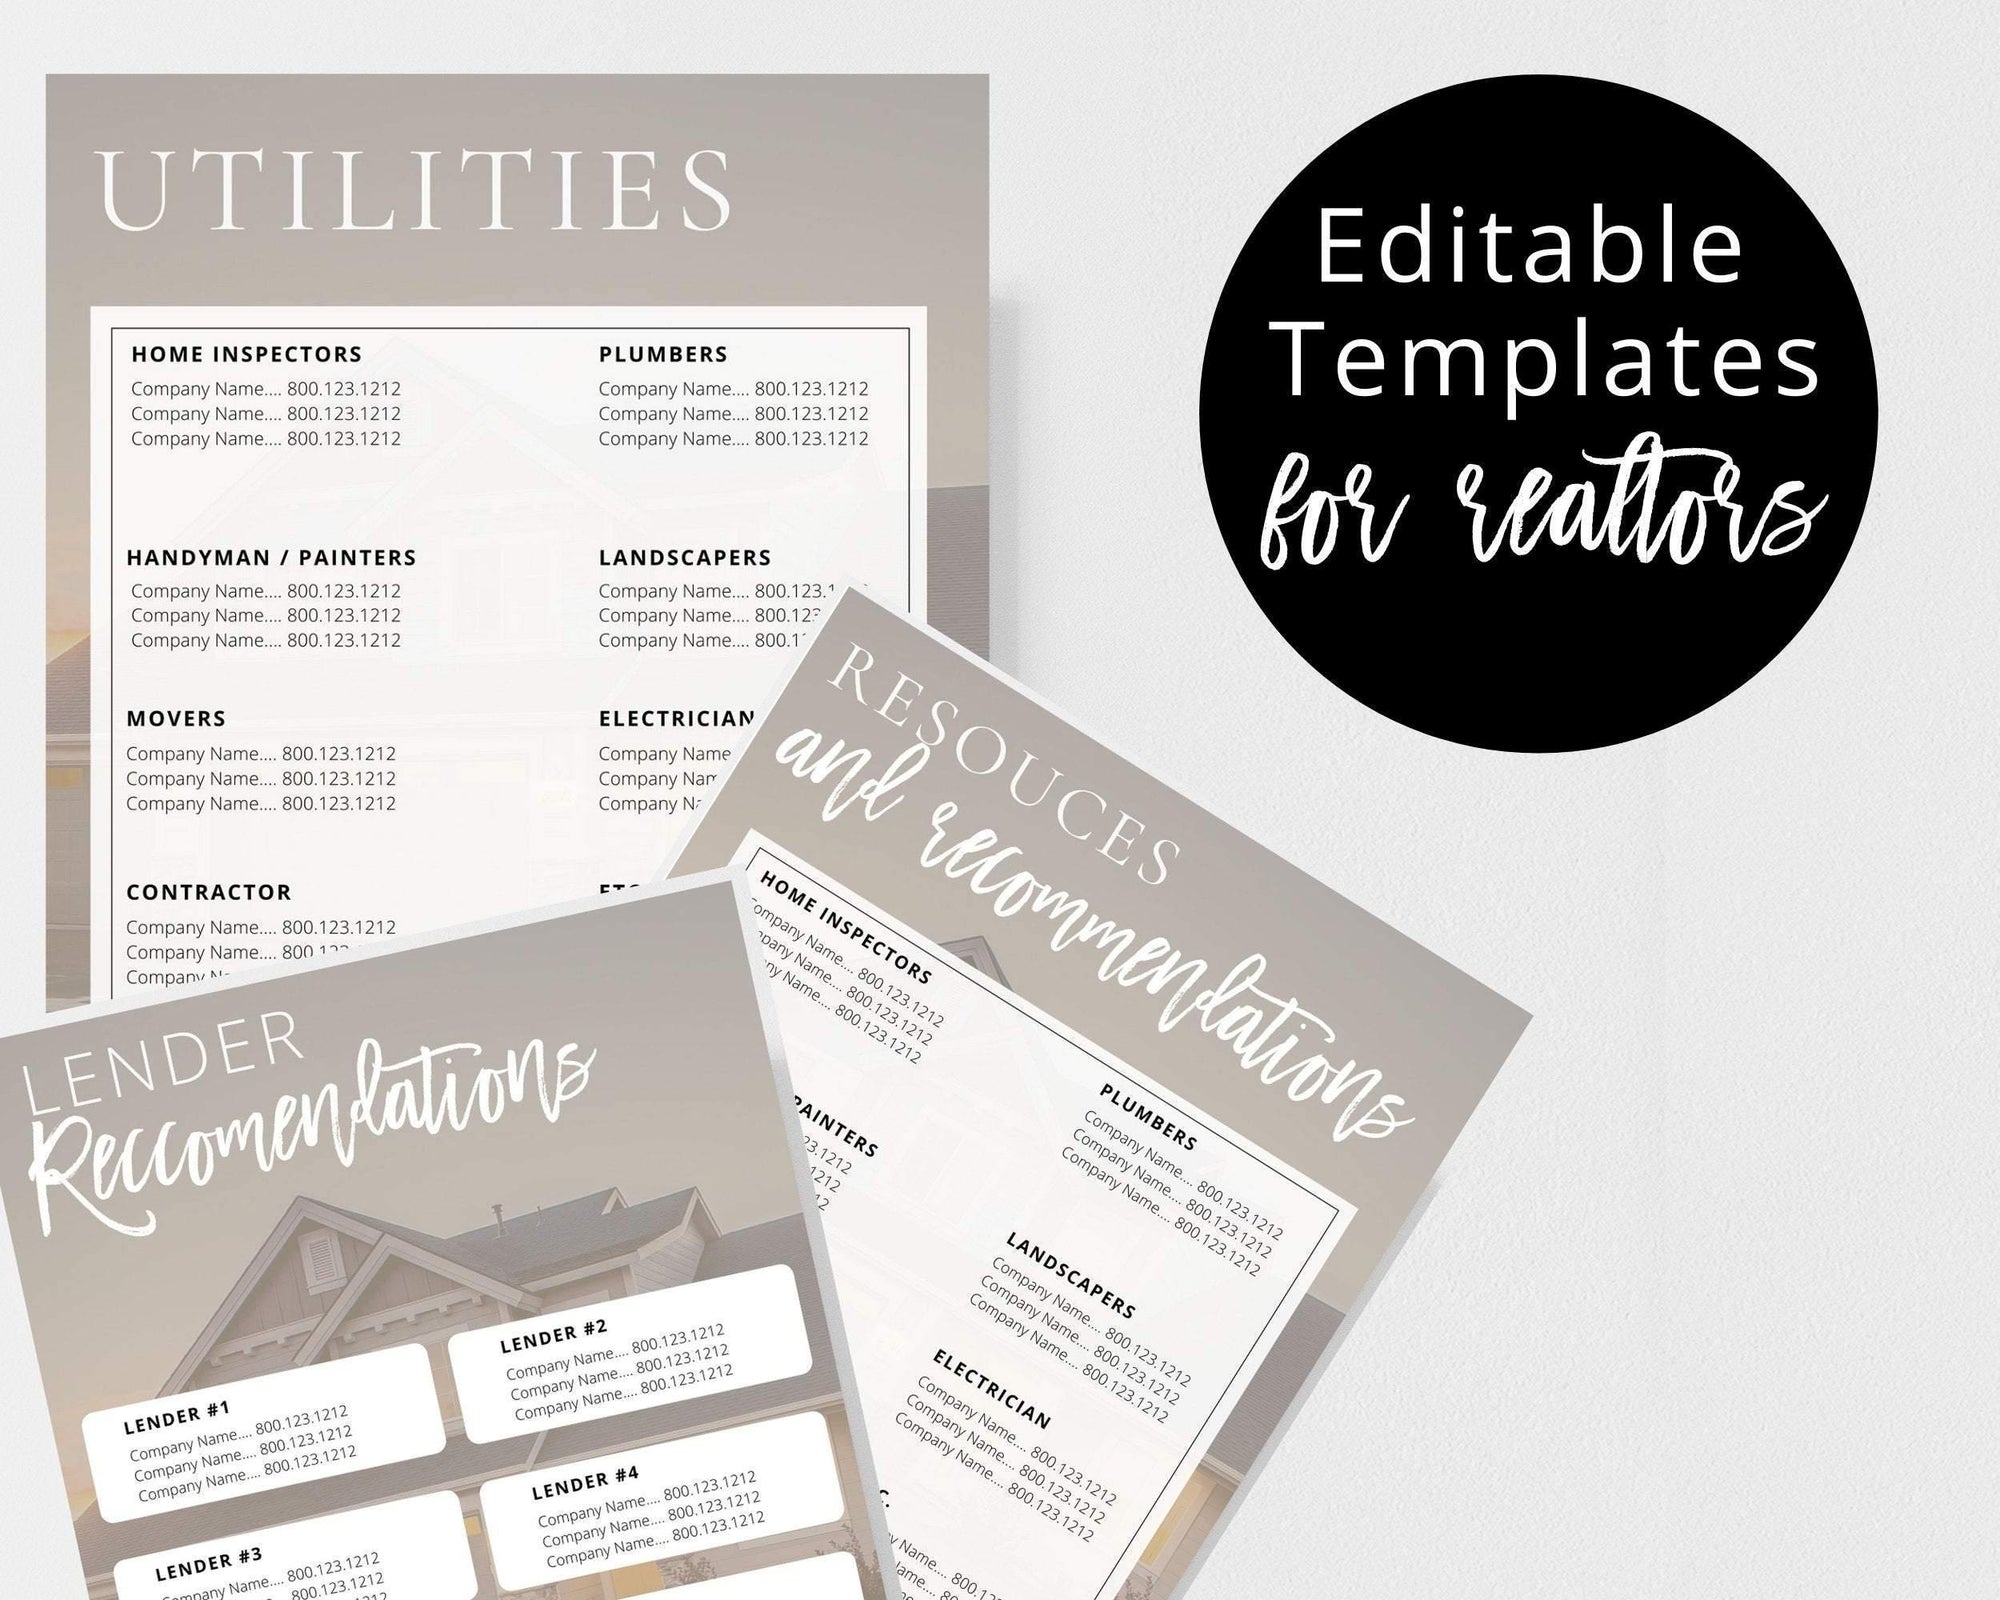 Utility Provider Template for Realtors - Real Estate Templates Co